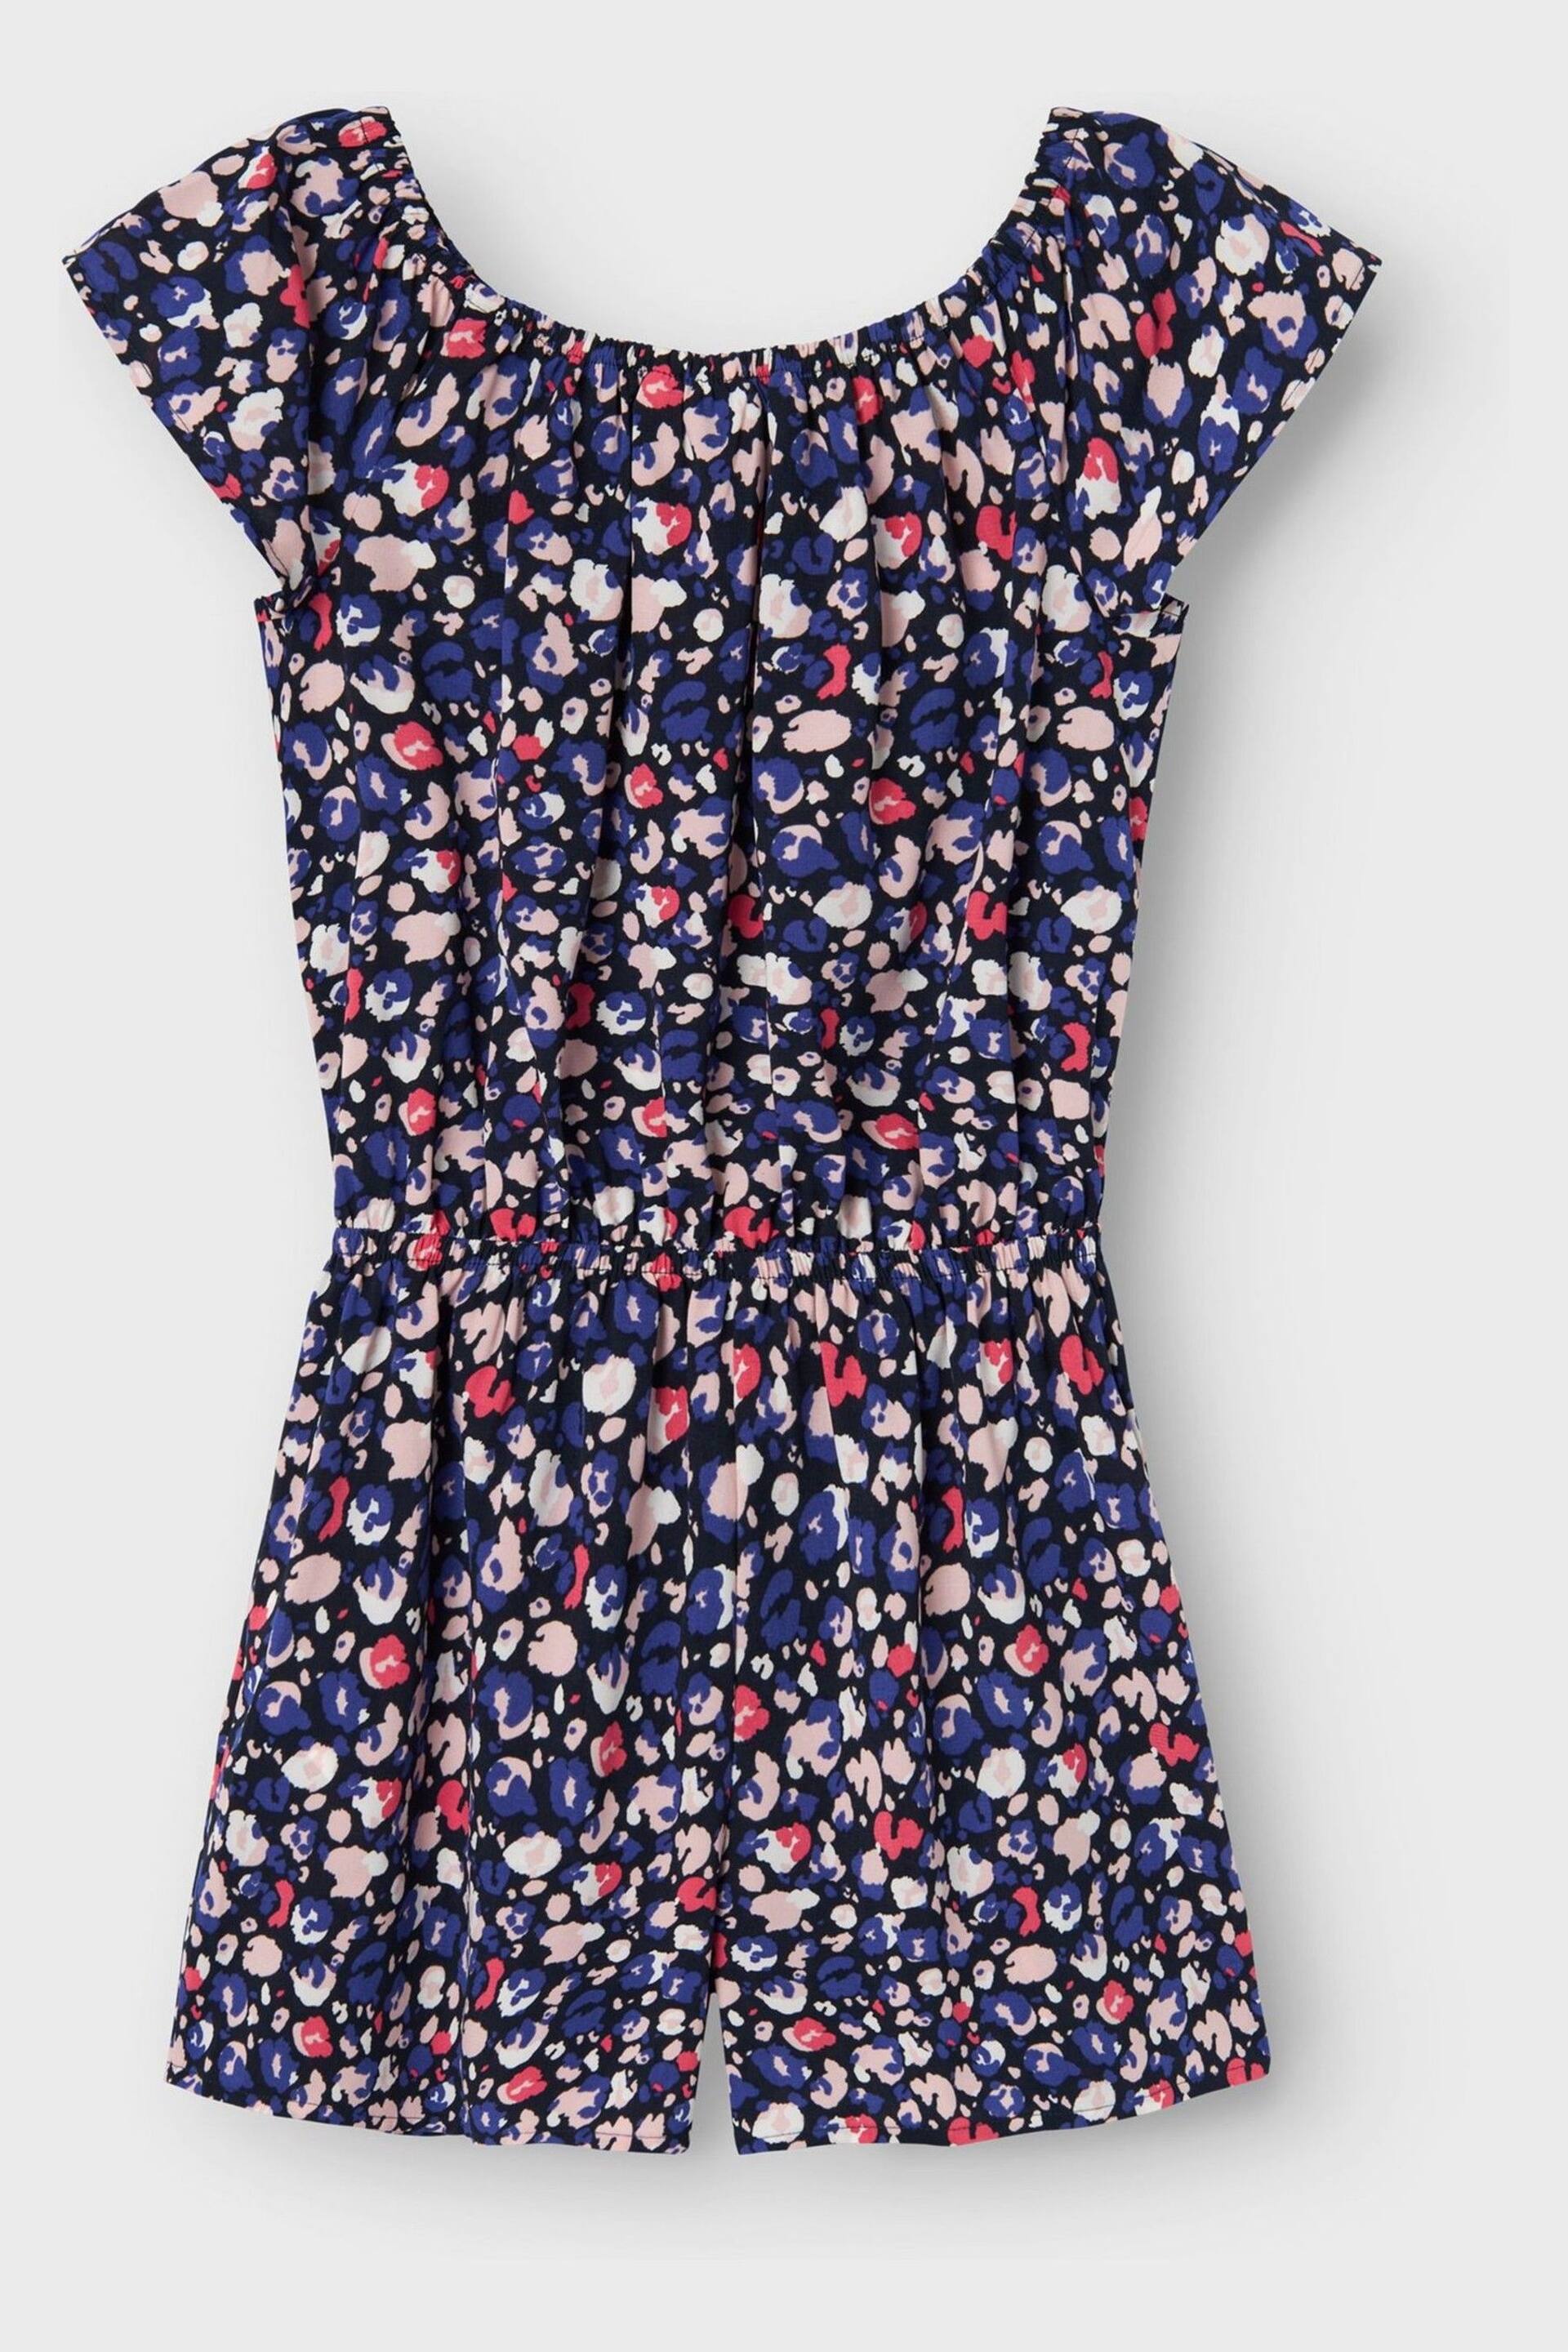 Name It Blue Printed Playsuit - Image 1 of 3